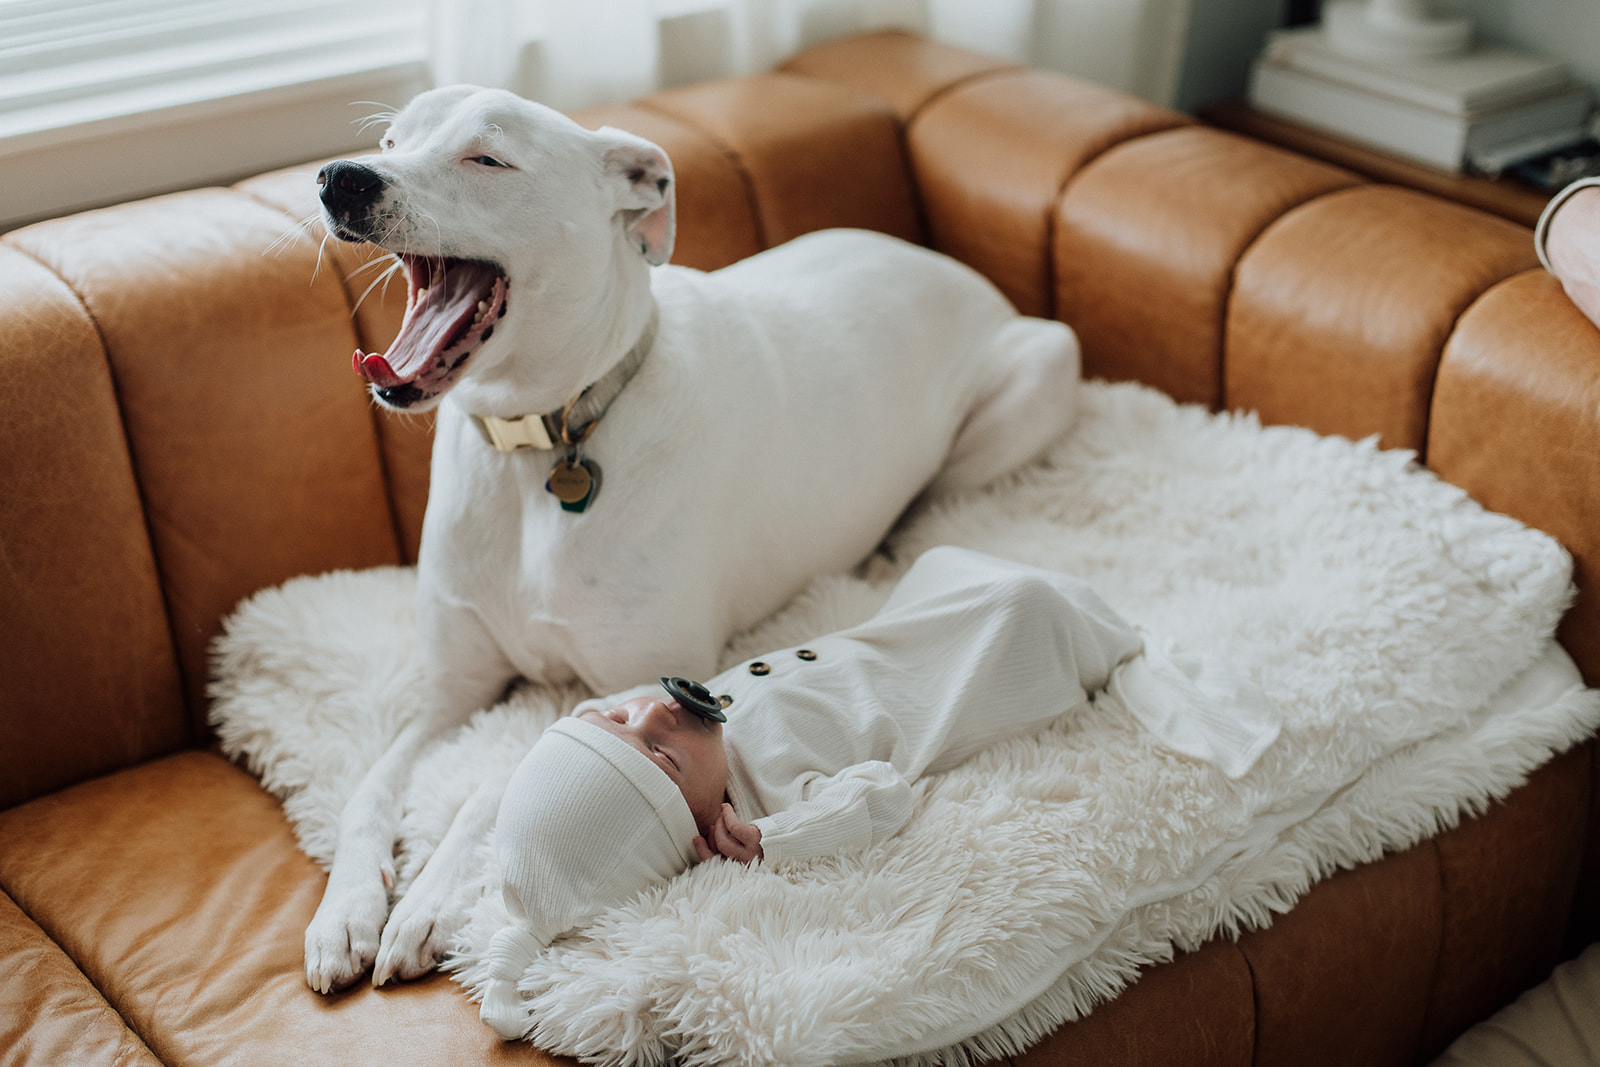 Family dog yawns as they lay next to the newborn baby on the living room couch